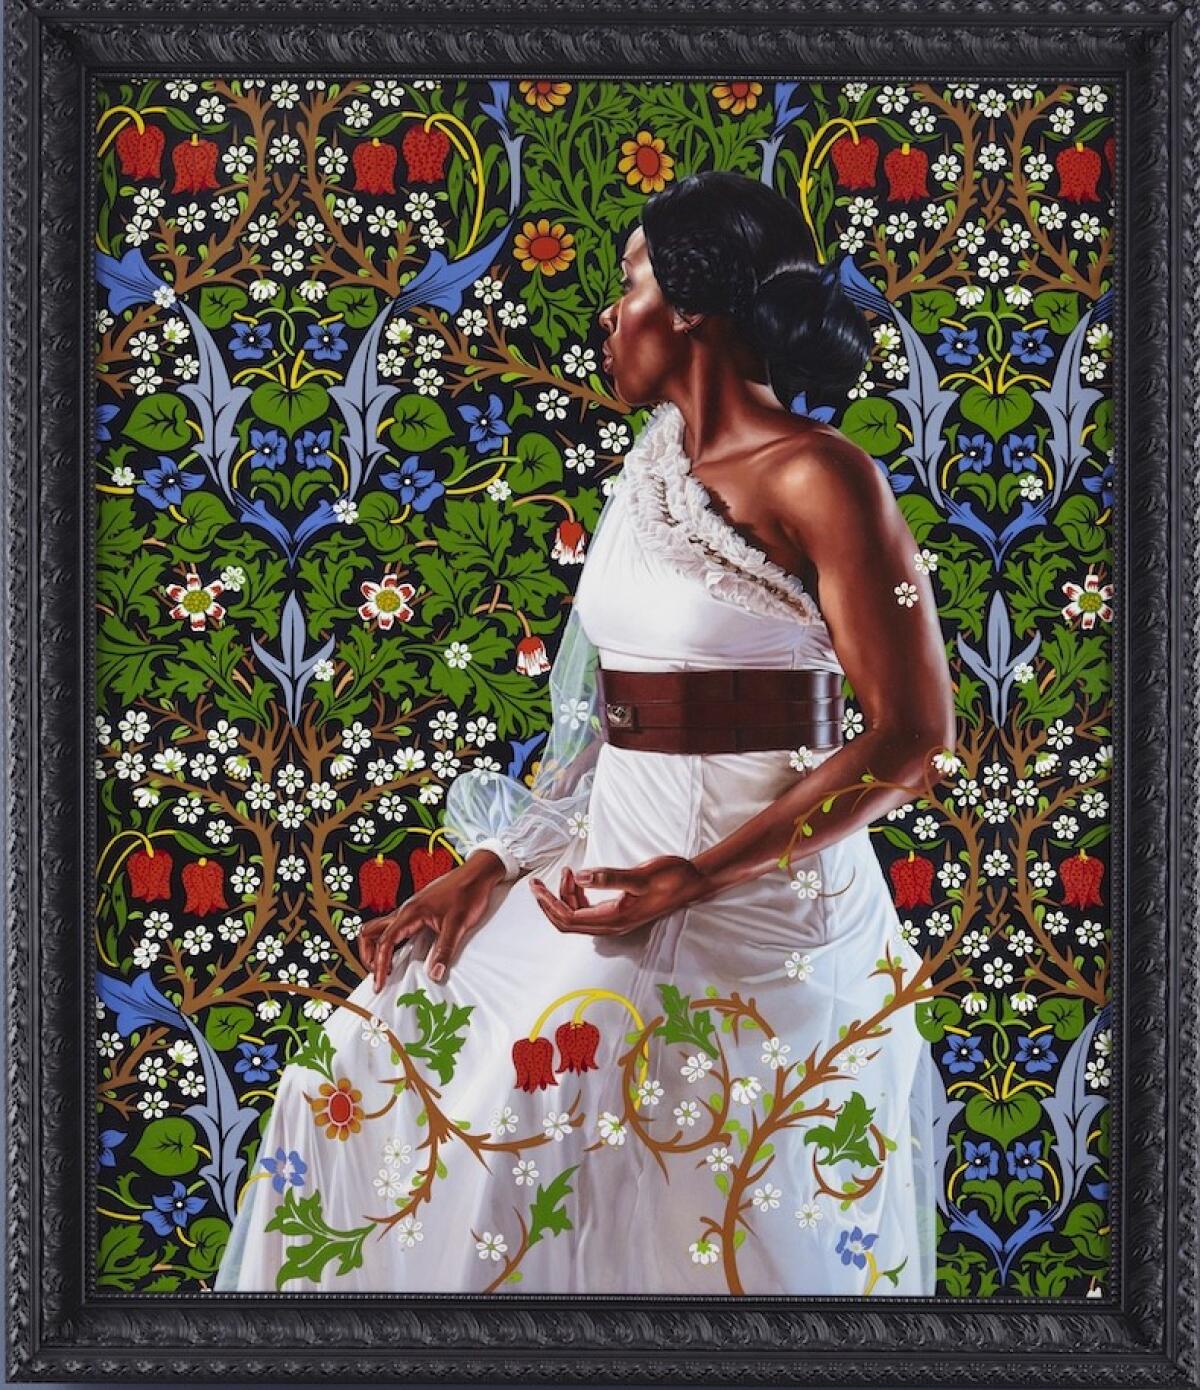 Kehinde Wiley's "Mrs. Siddons" is a 2012 portrait of a black woman in a white dress, looking away, with a floral background